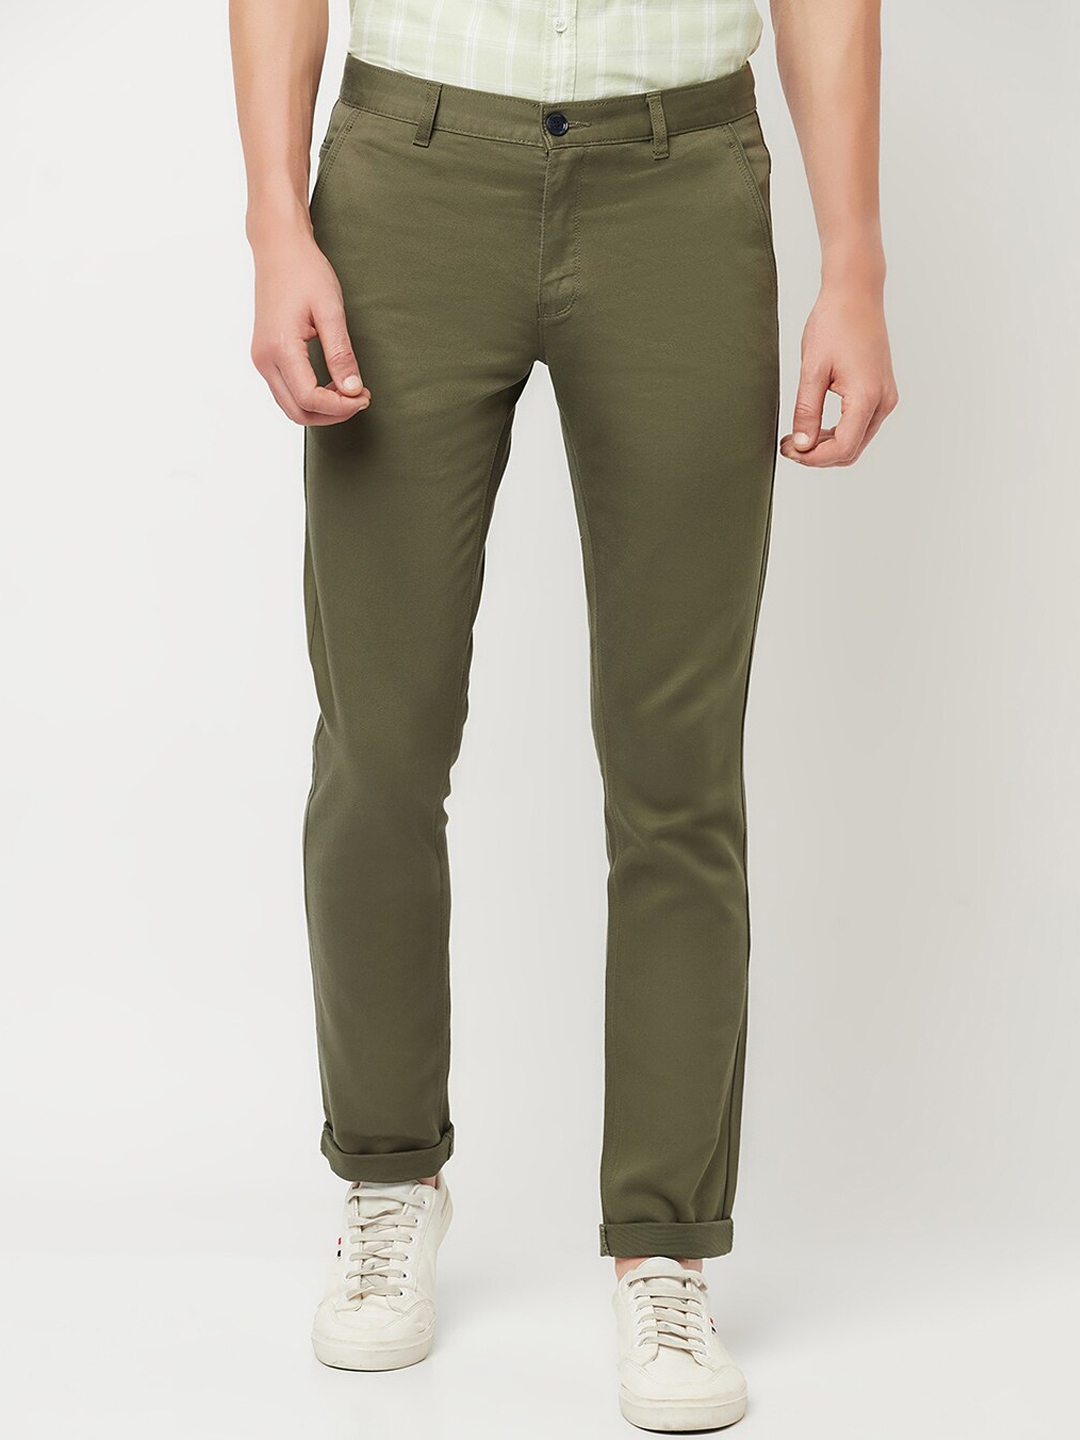 Buy Octave Men Olive Green Chinos Trousers - Trousers for Men 17310960 ...